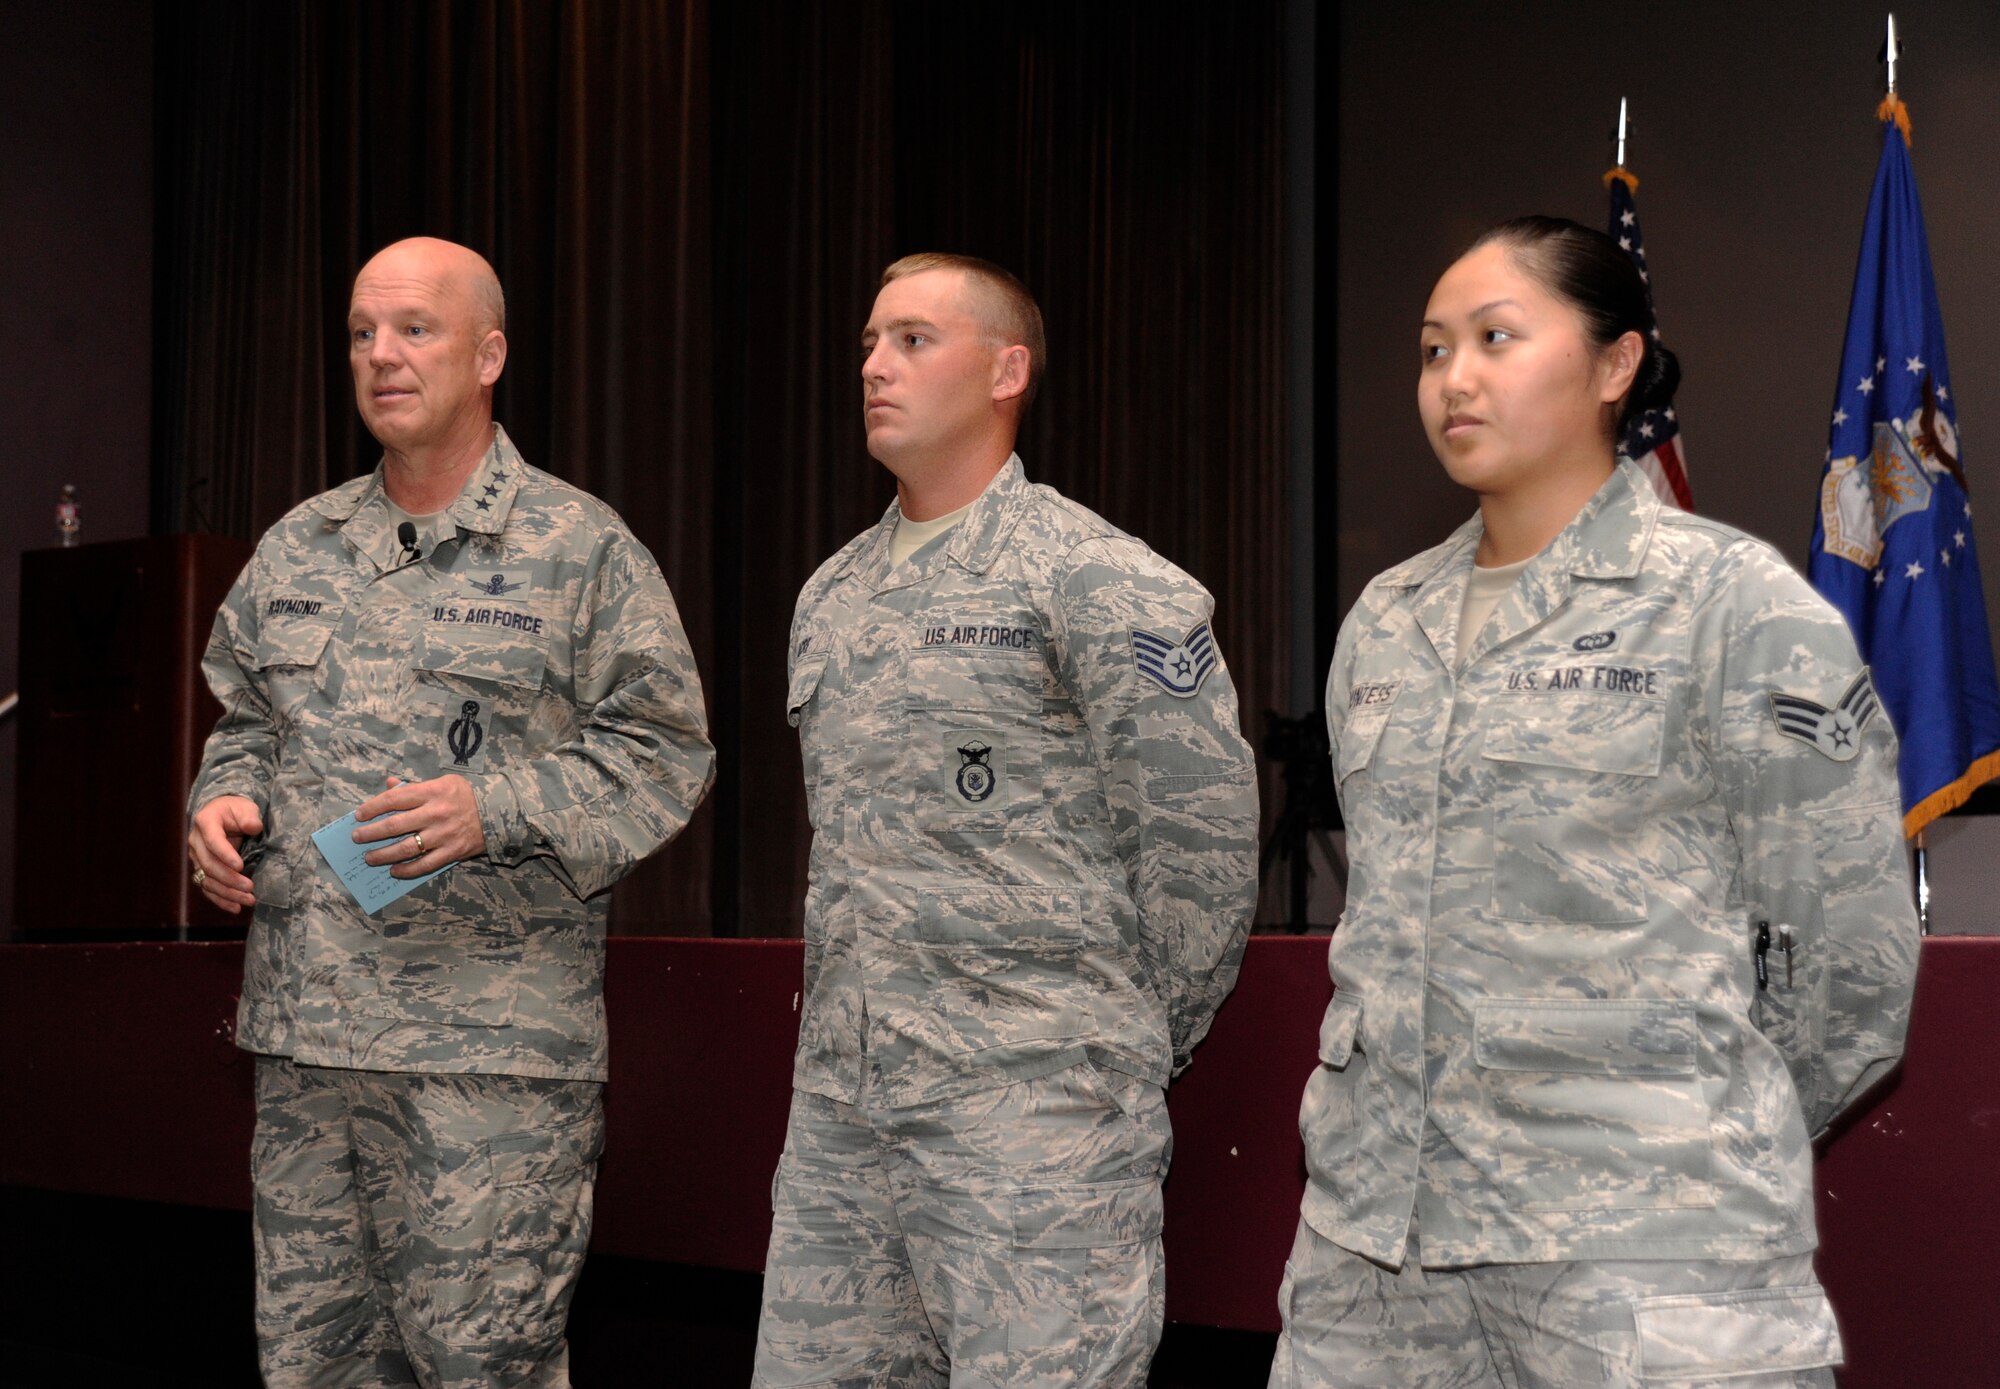 Lt. Gen. John Raymond, Commander, 14th Air Force (Air Forces Strategic) and Joint Functional Component Command for Space, recognizes Staff Sgt. Shawn Acre, 30th Security Forces Squadron patrolman, and Senior Airman Dao Countess, 30th Operations Support Squadron range weather forecaster, during a base all call, Feb. 17, 2015, Vandenberg Air Force Base, Calif. Acre and Countess were recognized amongst their peers for their commitment to Vandenberg’s mission. (U.S. Air Force Photo by Airman Robert J. Volio/Released)